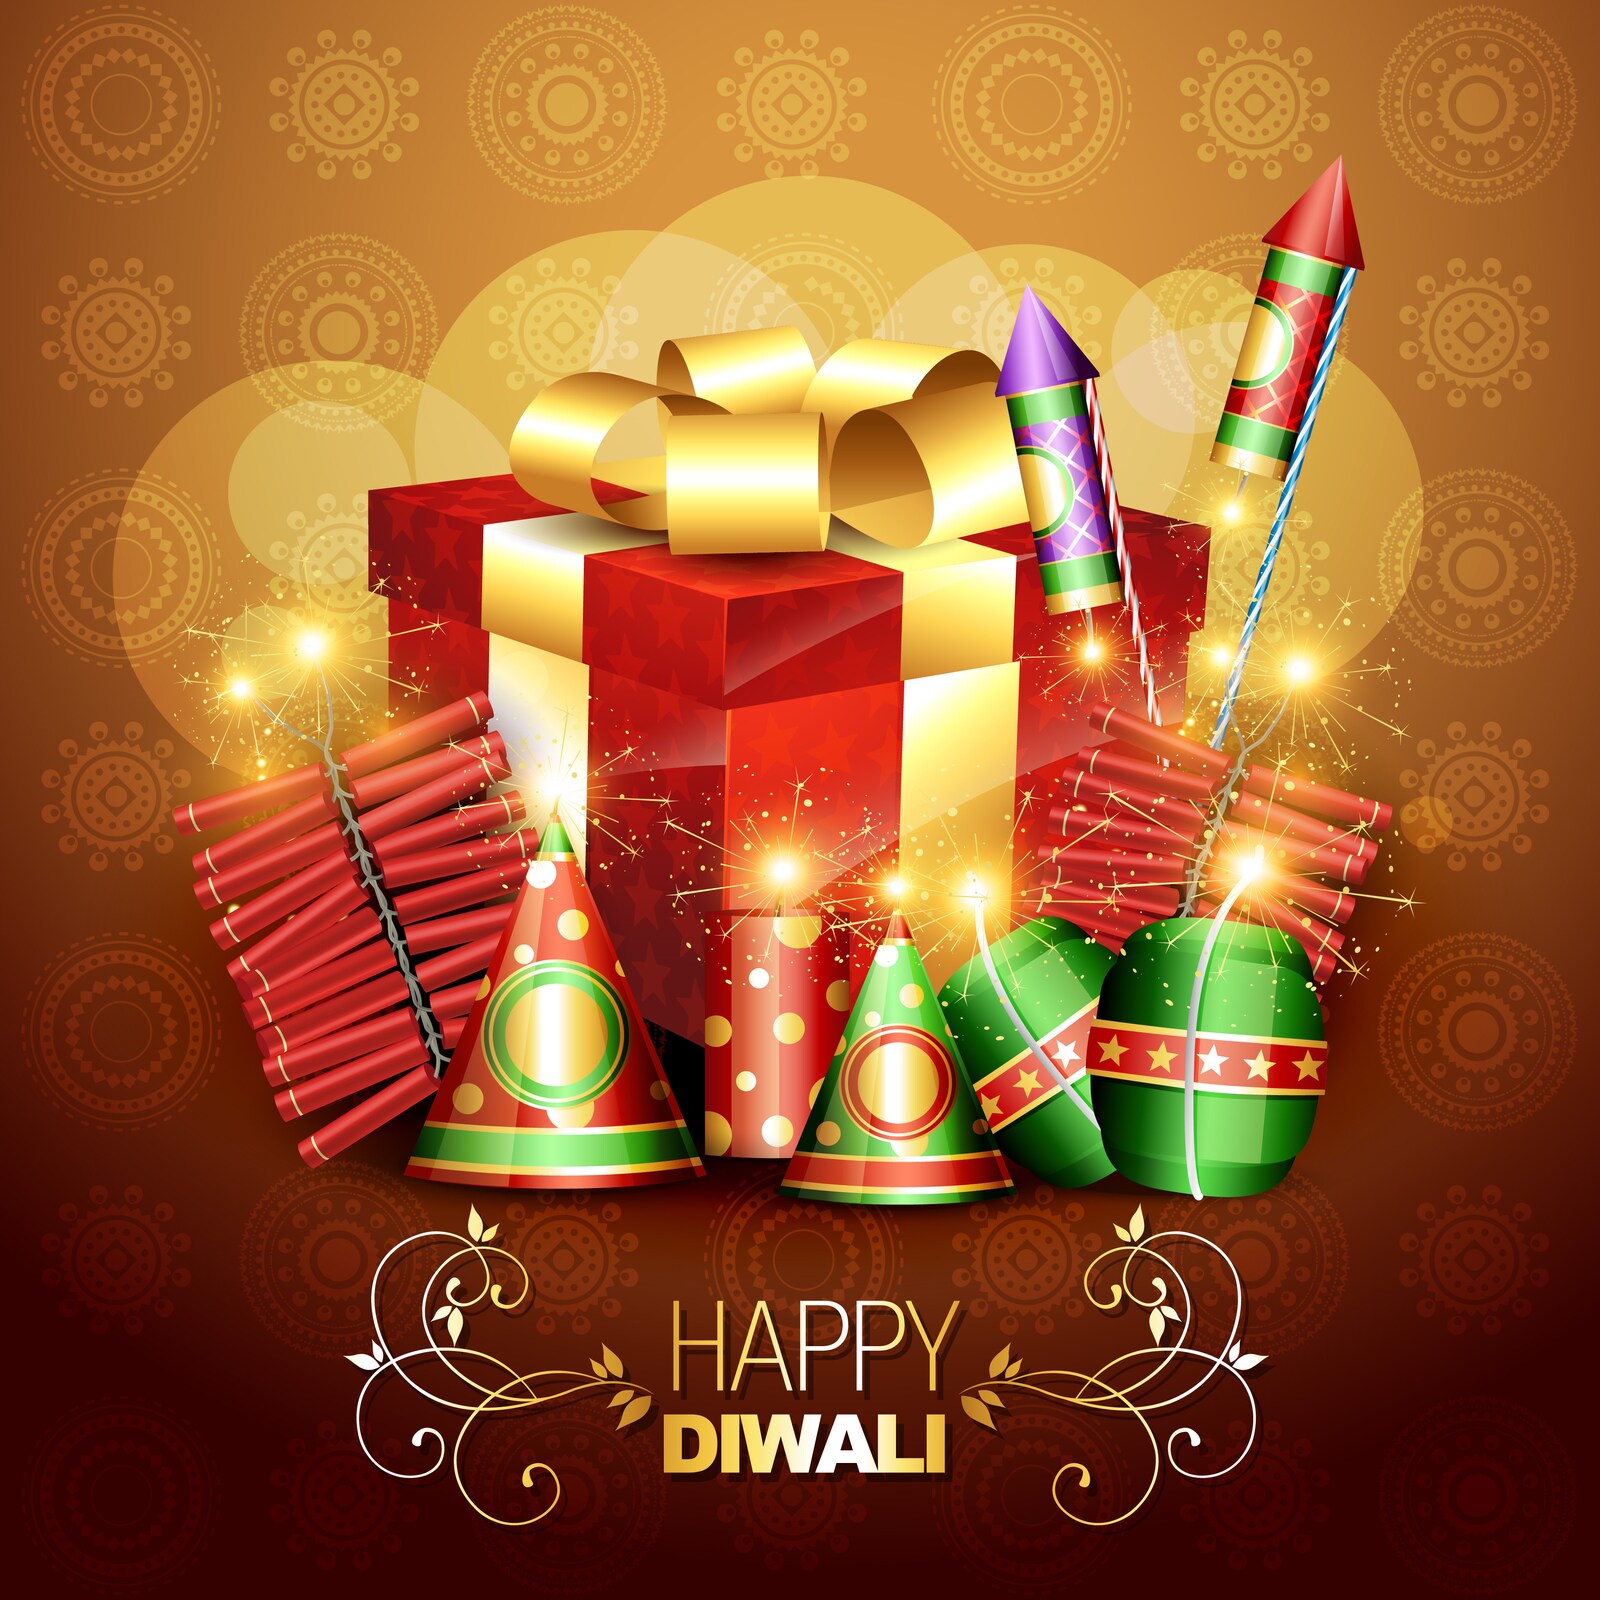 SSS wishes you a Happy Diwali- A Surprise Gift Waiting Inside! - Smart Sync  Services